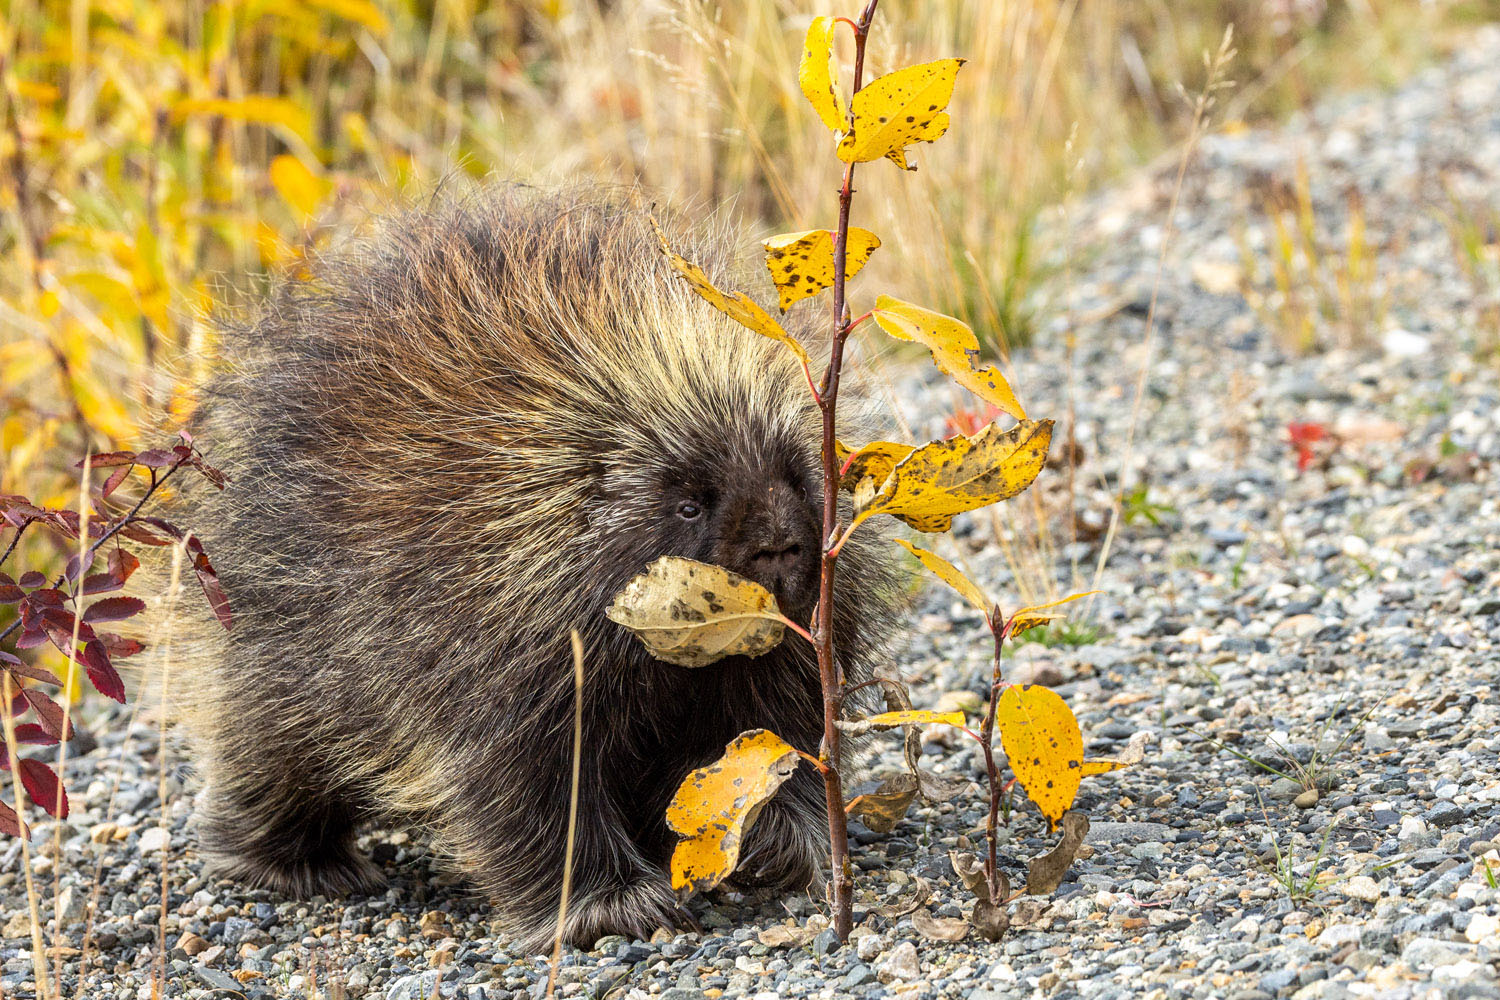 A large, healthy porcupine stocks up on autumn food as winter draws near.